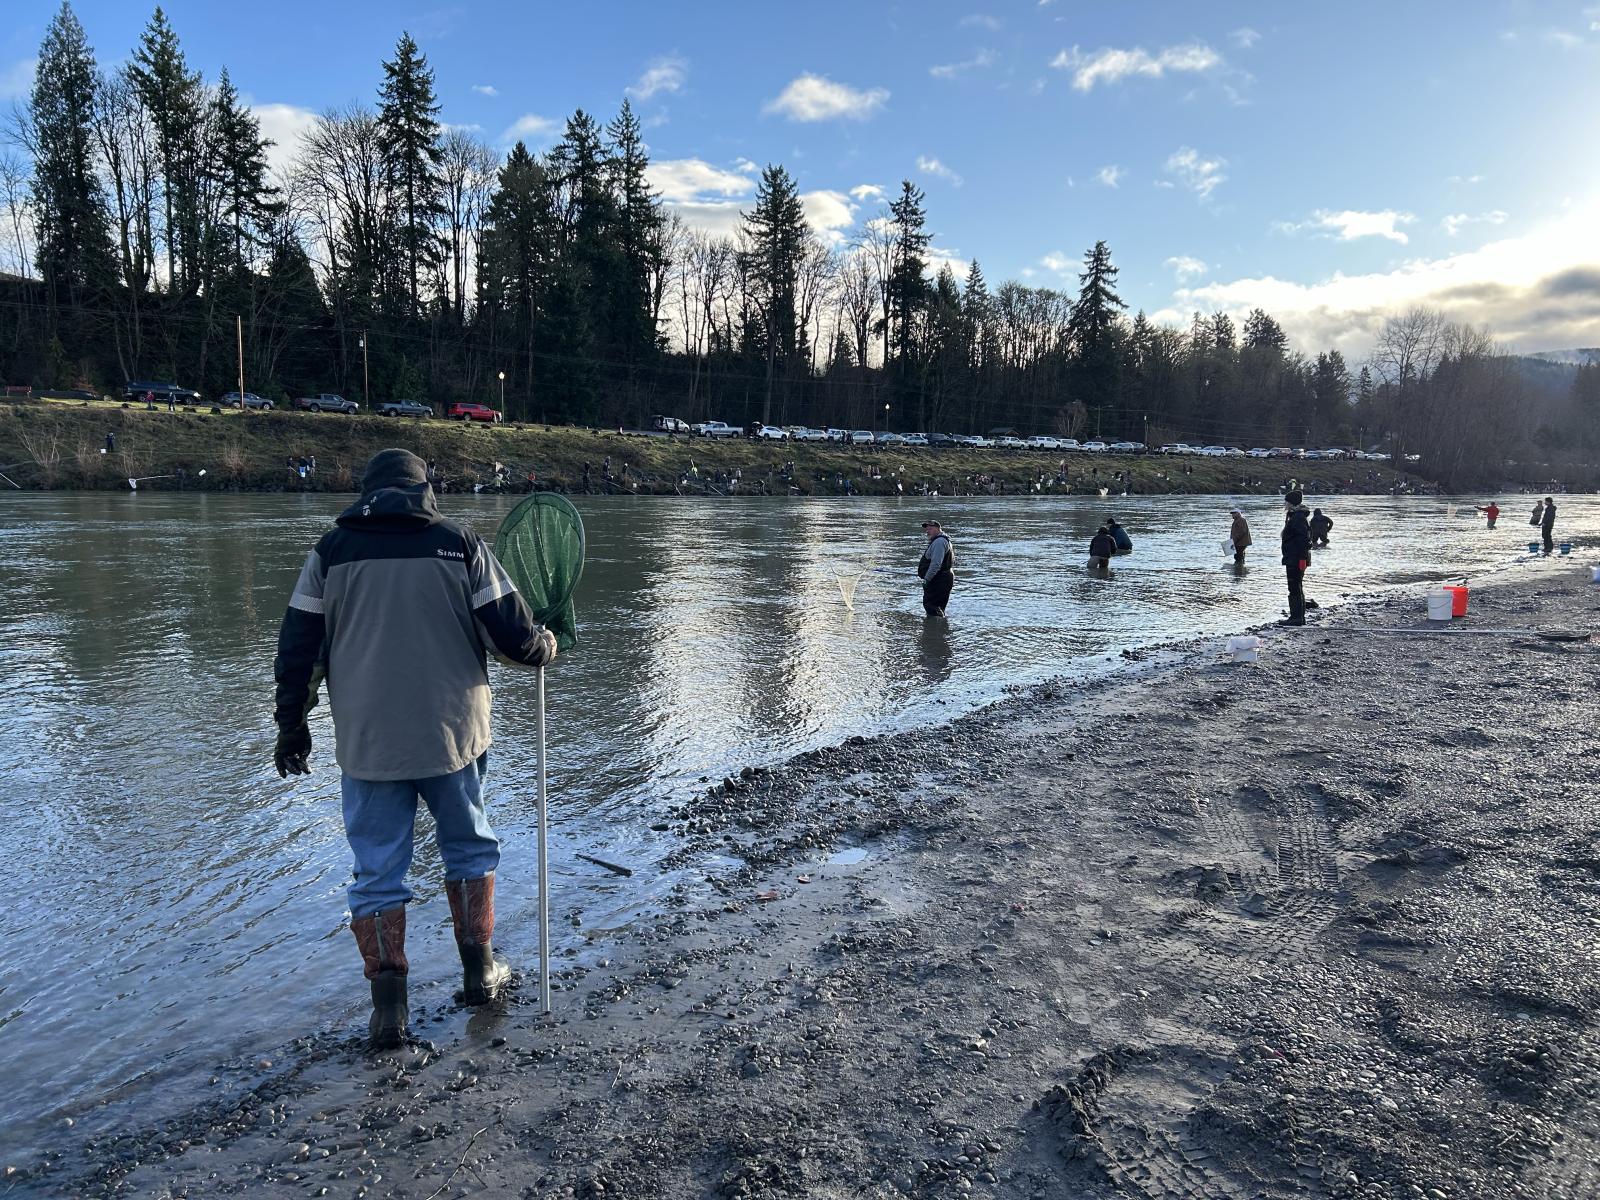 Additional one-day smelt fishery announced for Cowlitz River on Tuesday,  March 5